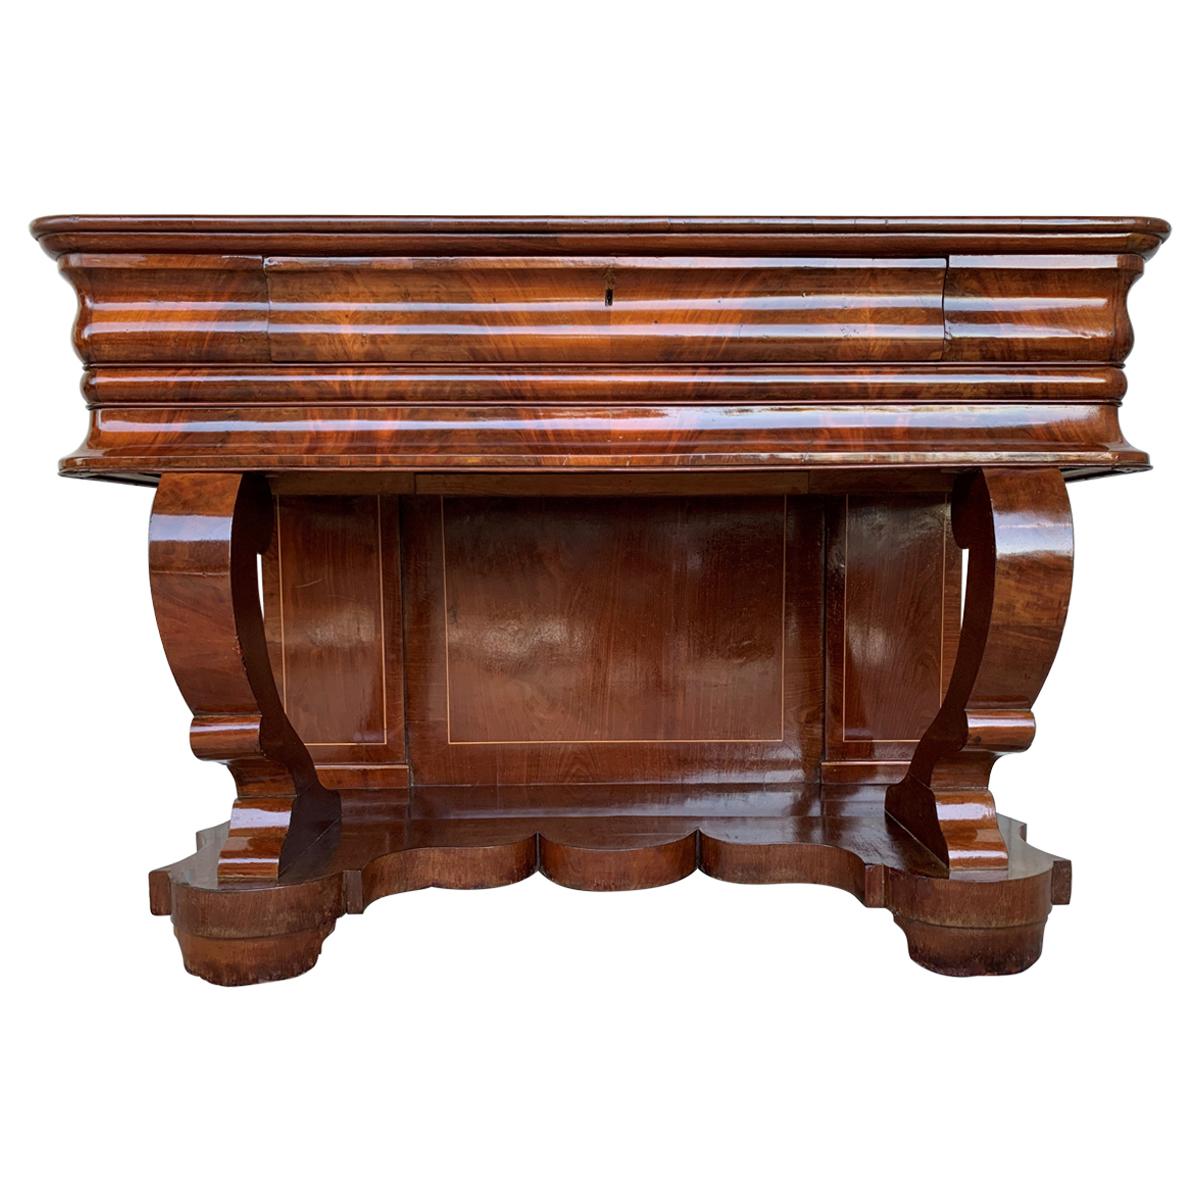 Early Biedermeier Period Walnut Console Table with Drawer, Austria, circa 1830 For Sale